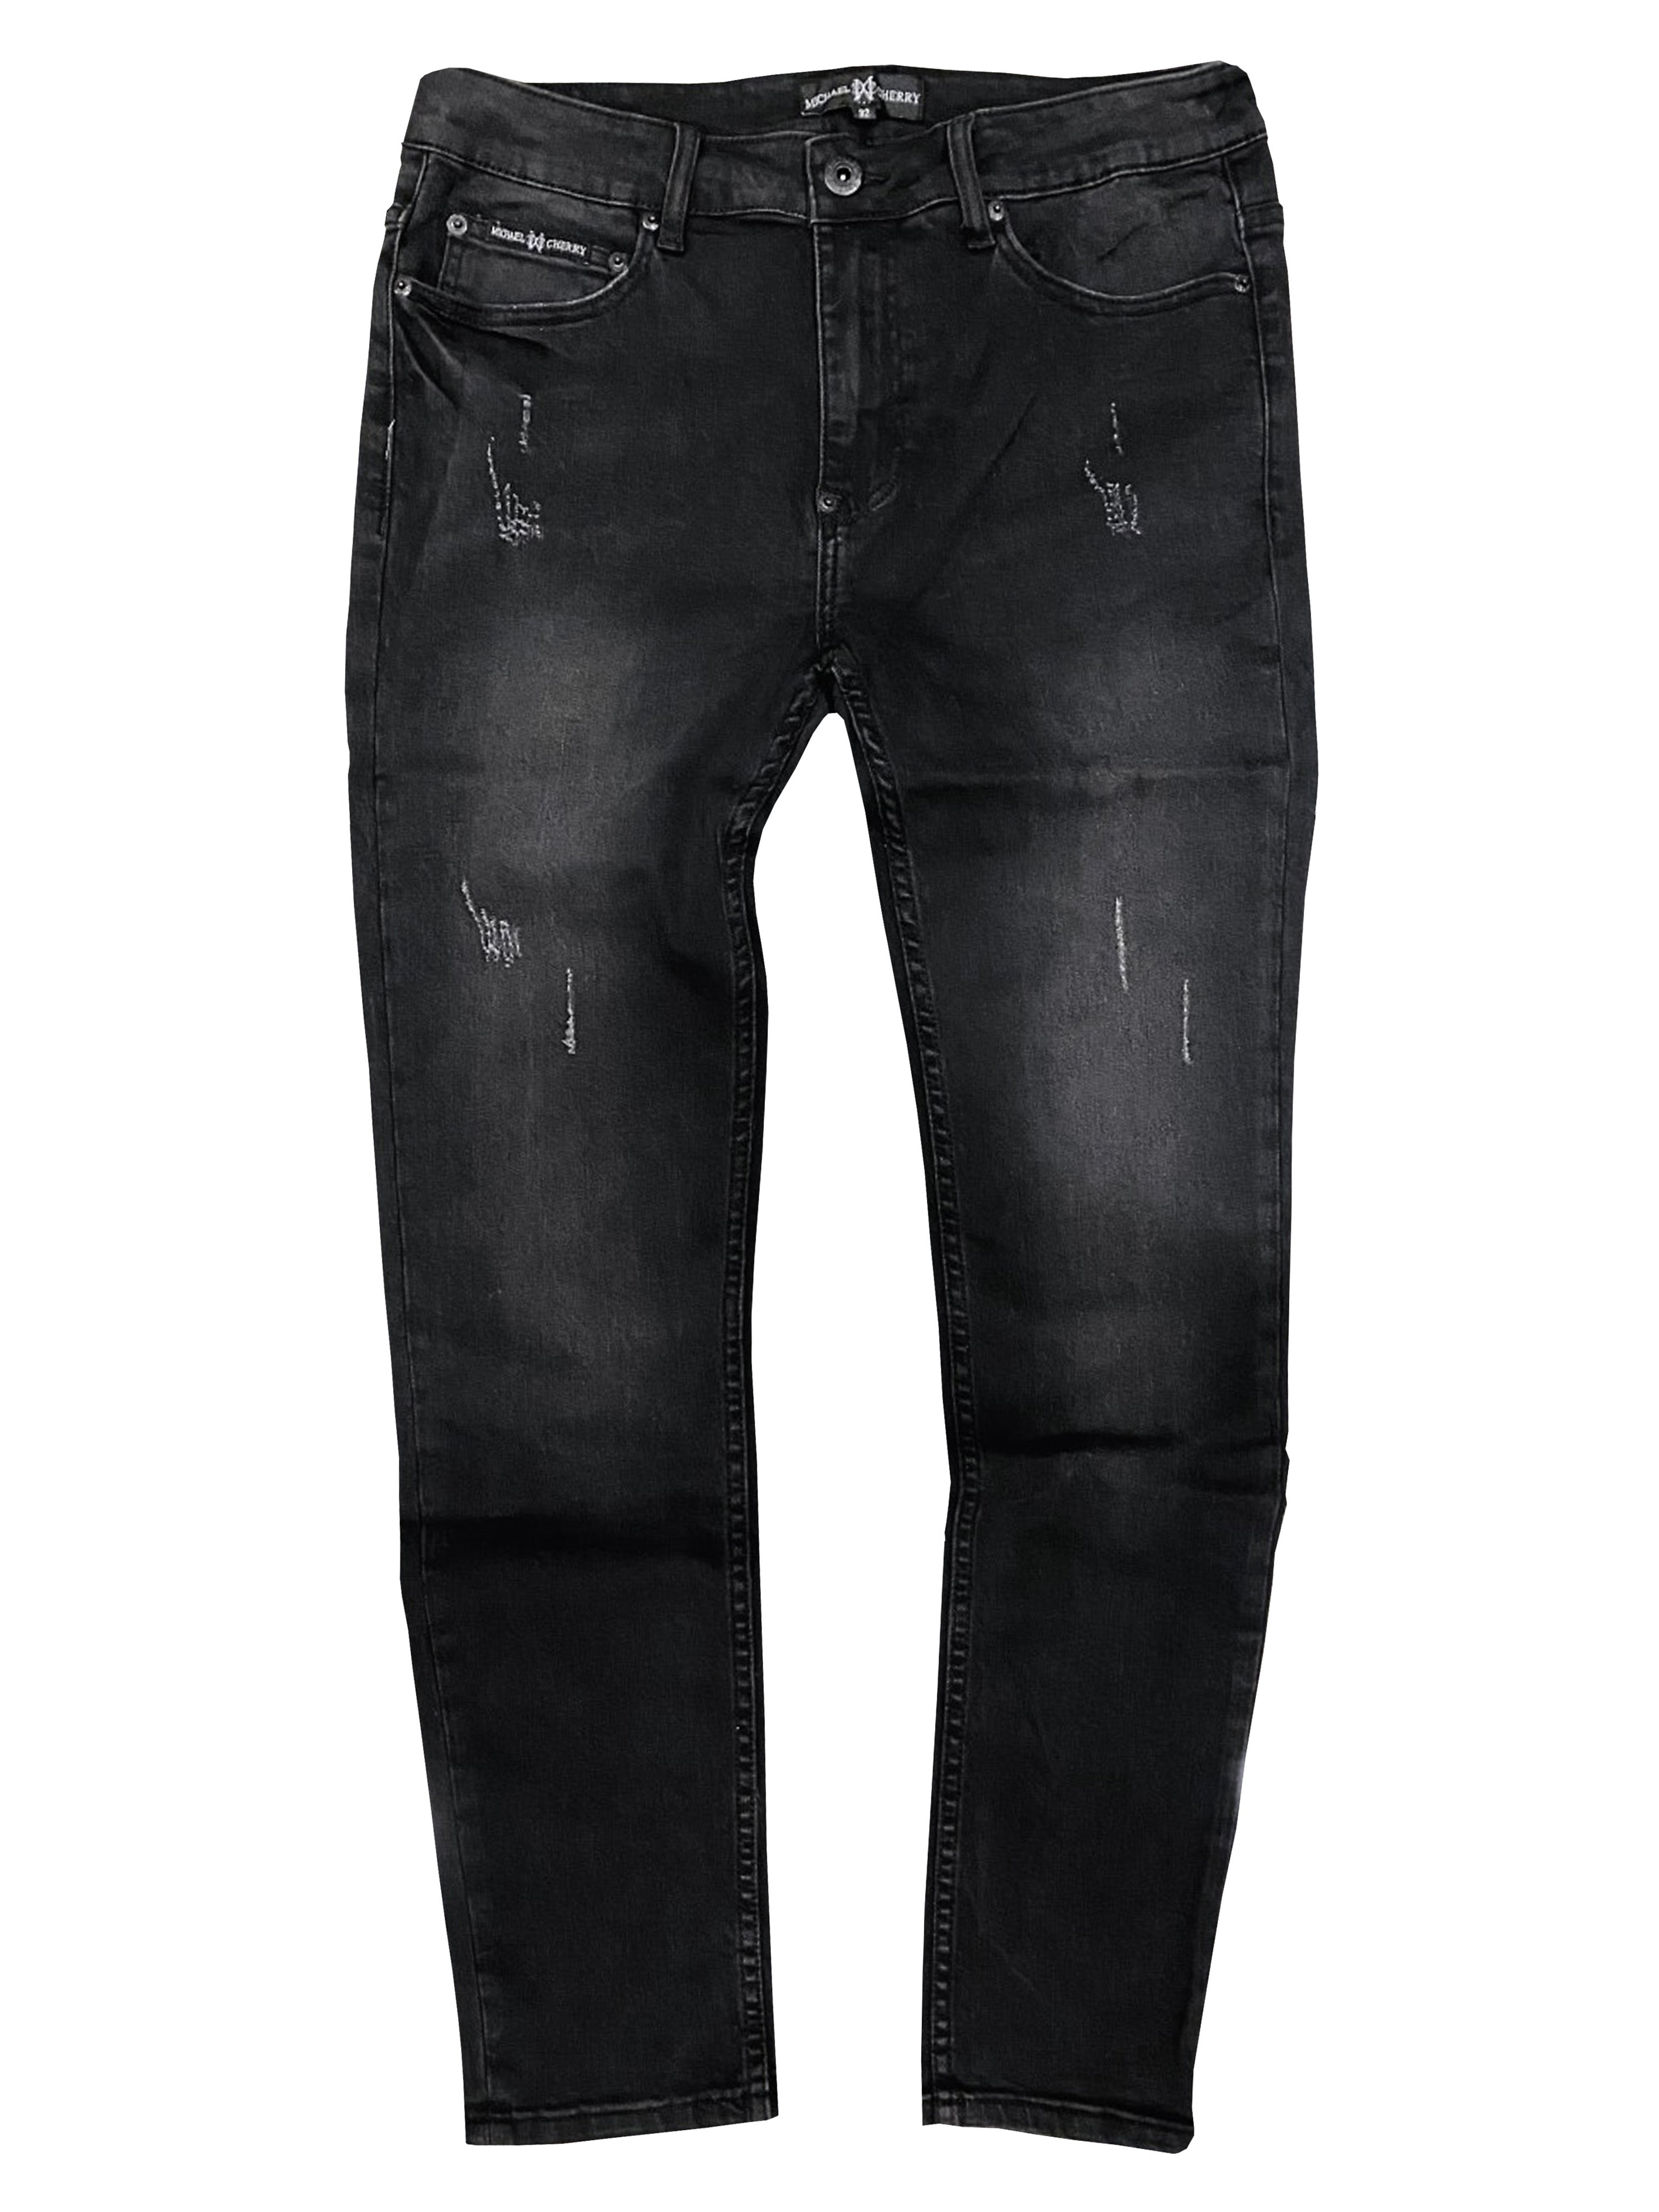 Stealth Black washed jean – Michael Cherry Brand